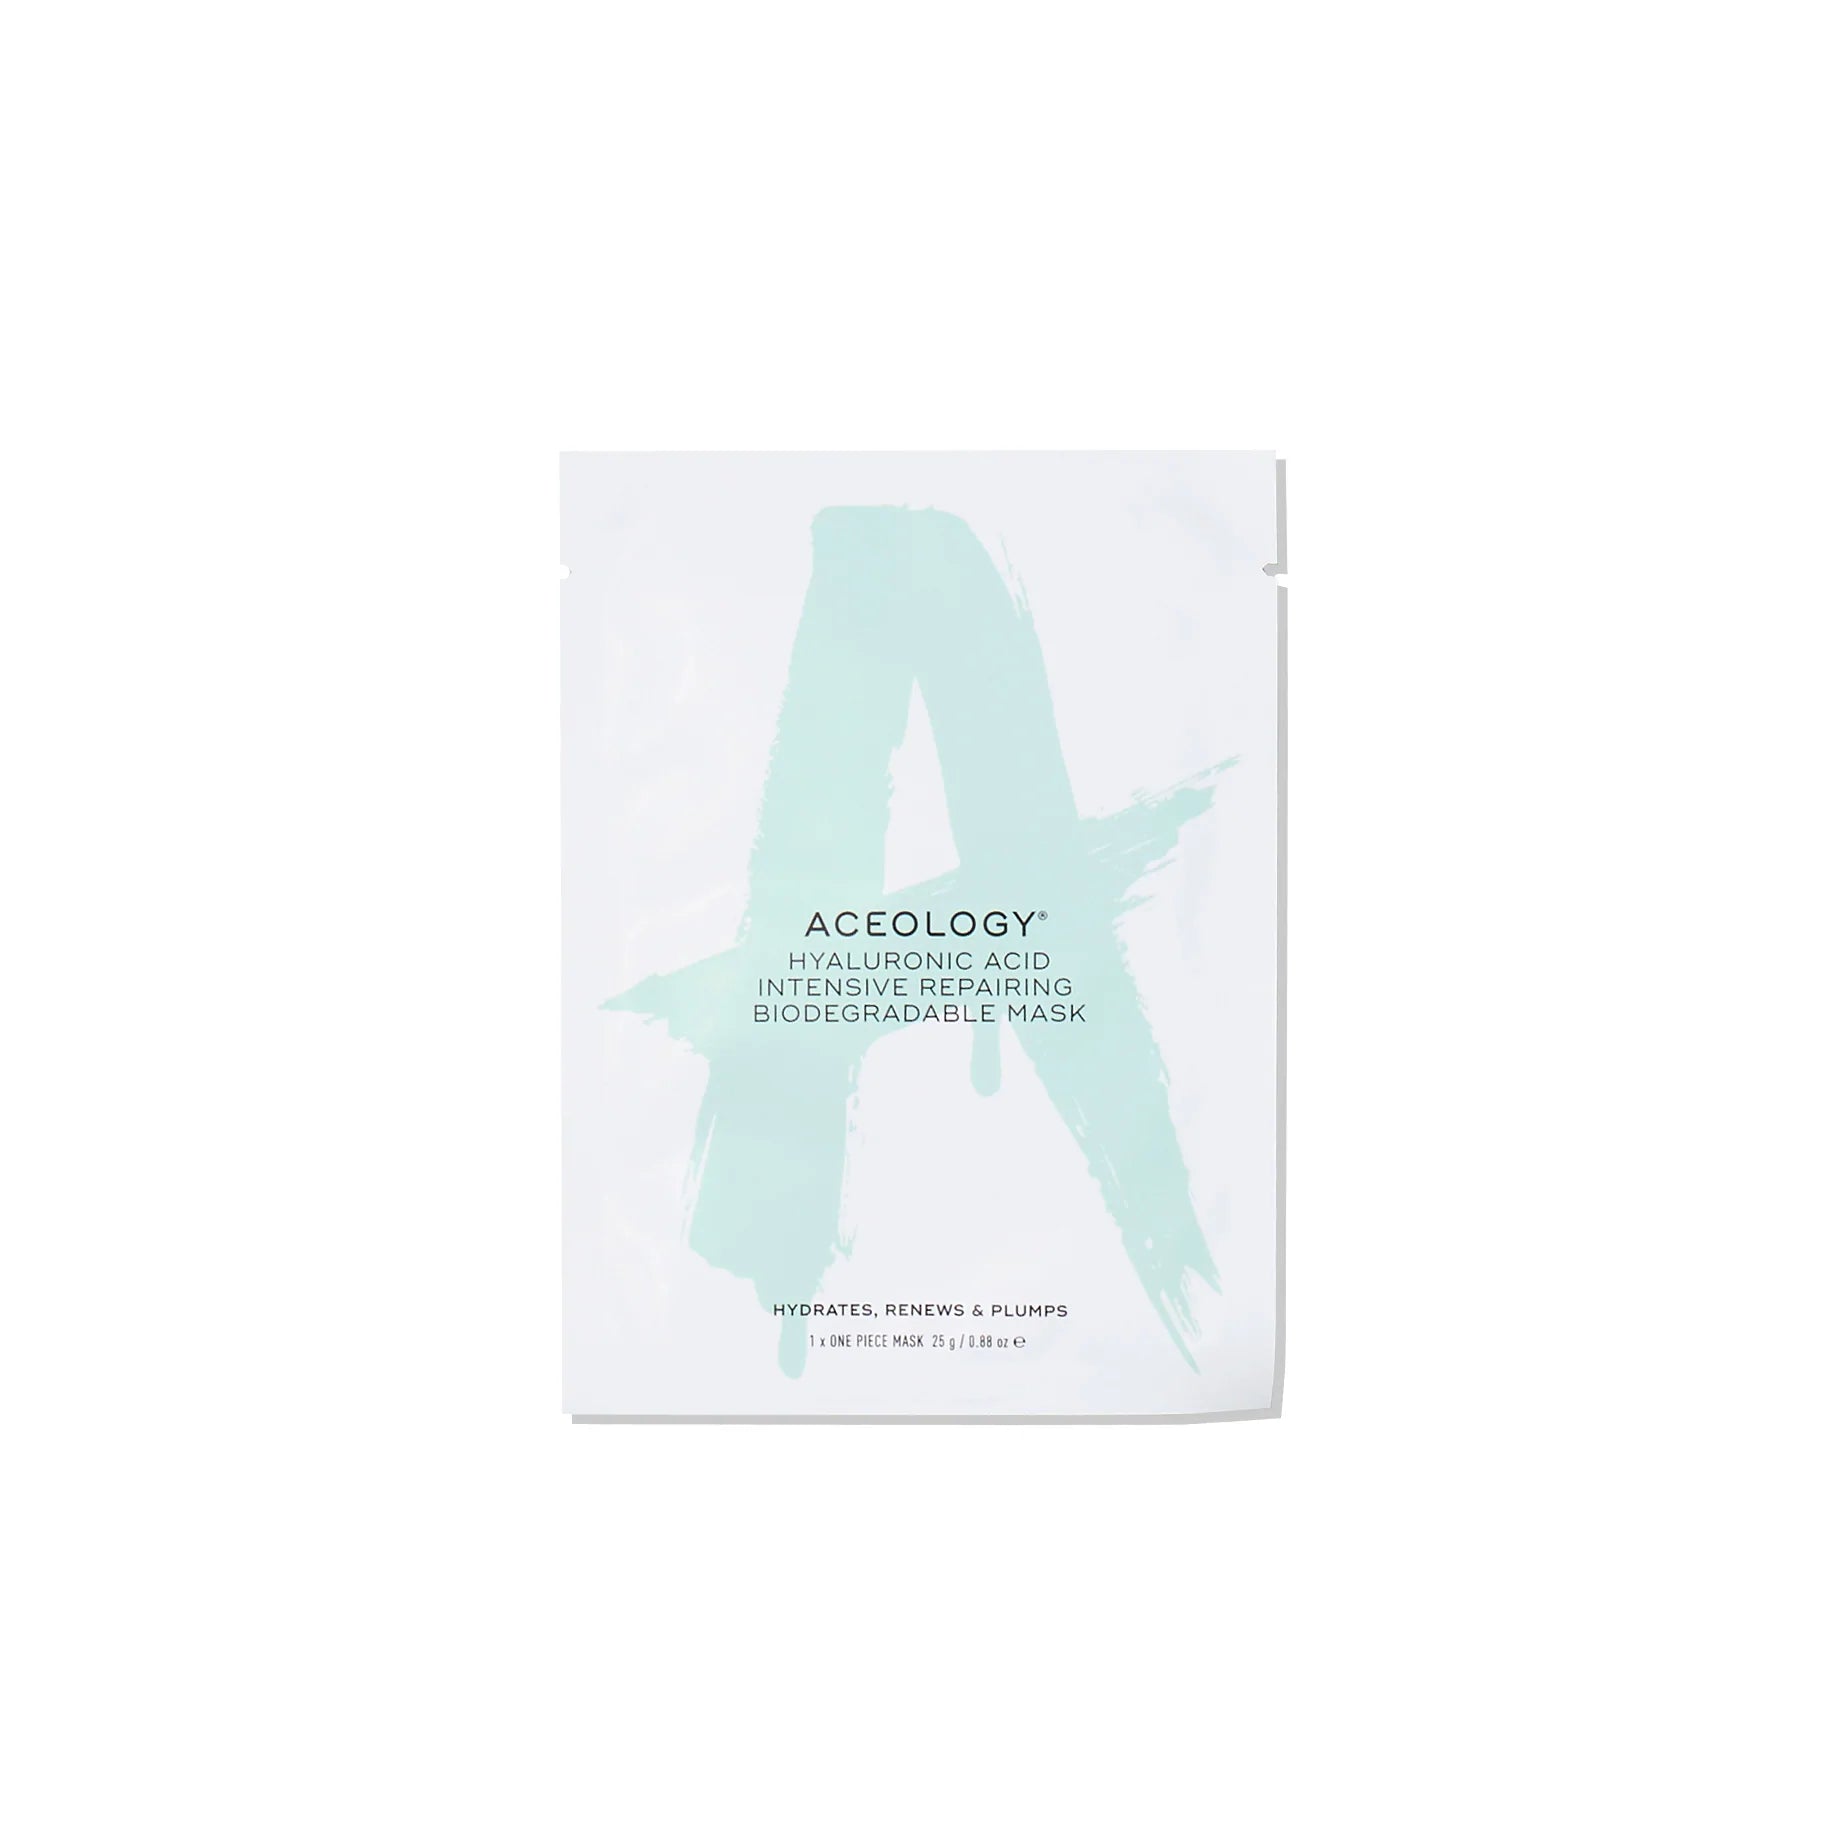 Aceology Hyaluronic Acid Intensive Reparing Biodegradable Mask (4 pack)